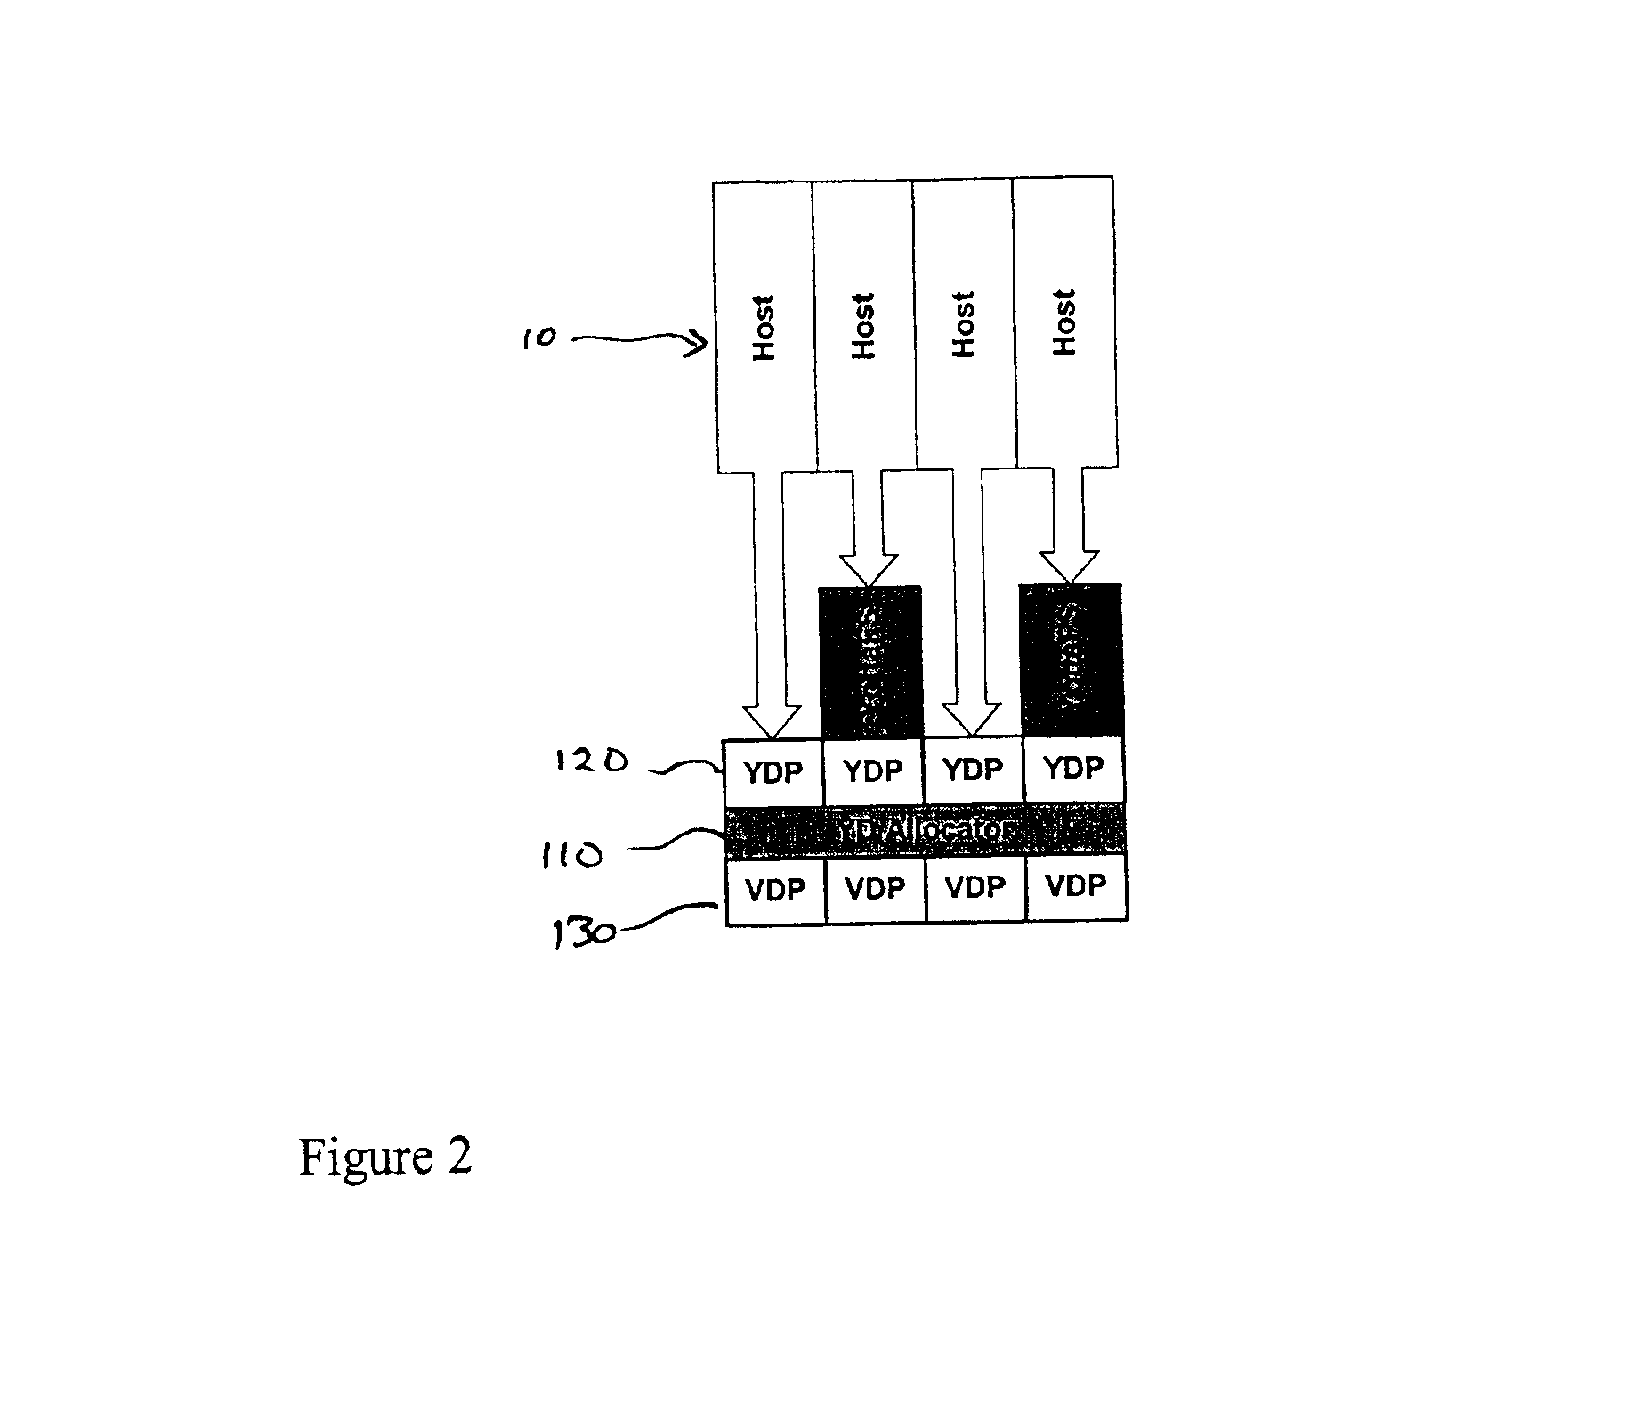 Storage virtualization system and methods